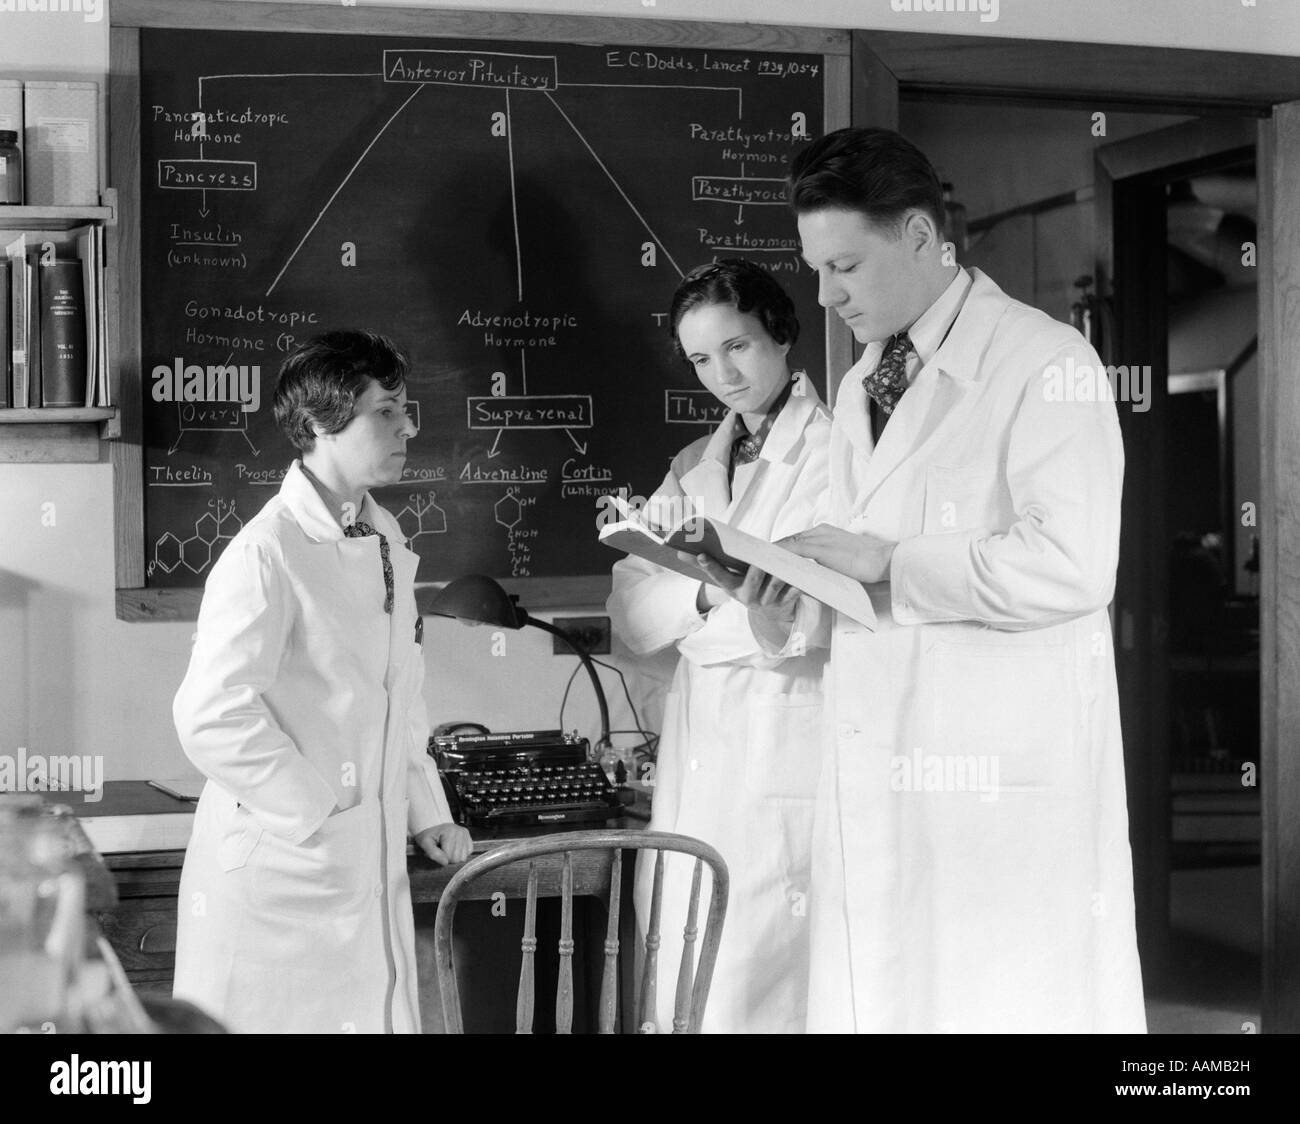 1930s 1940s THREE SCIENTISTS IN WHITE LAB COATS CONSULTING BOOK ONE MAN TWO WOMEN BLACKBOARD Stock Photo